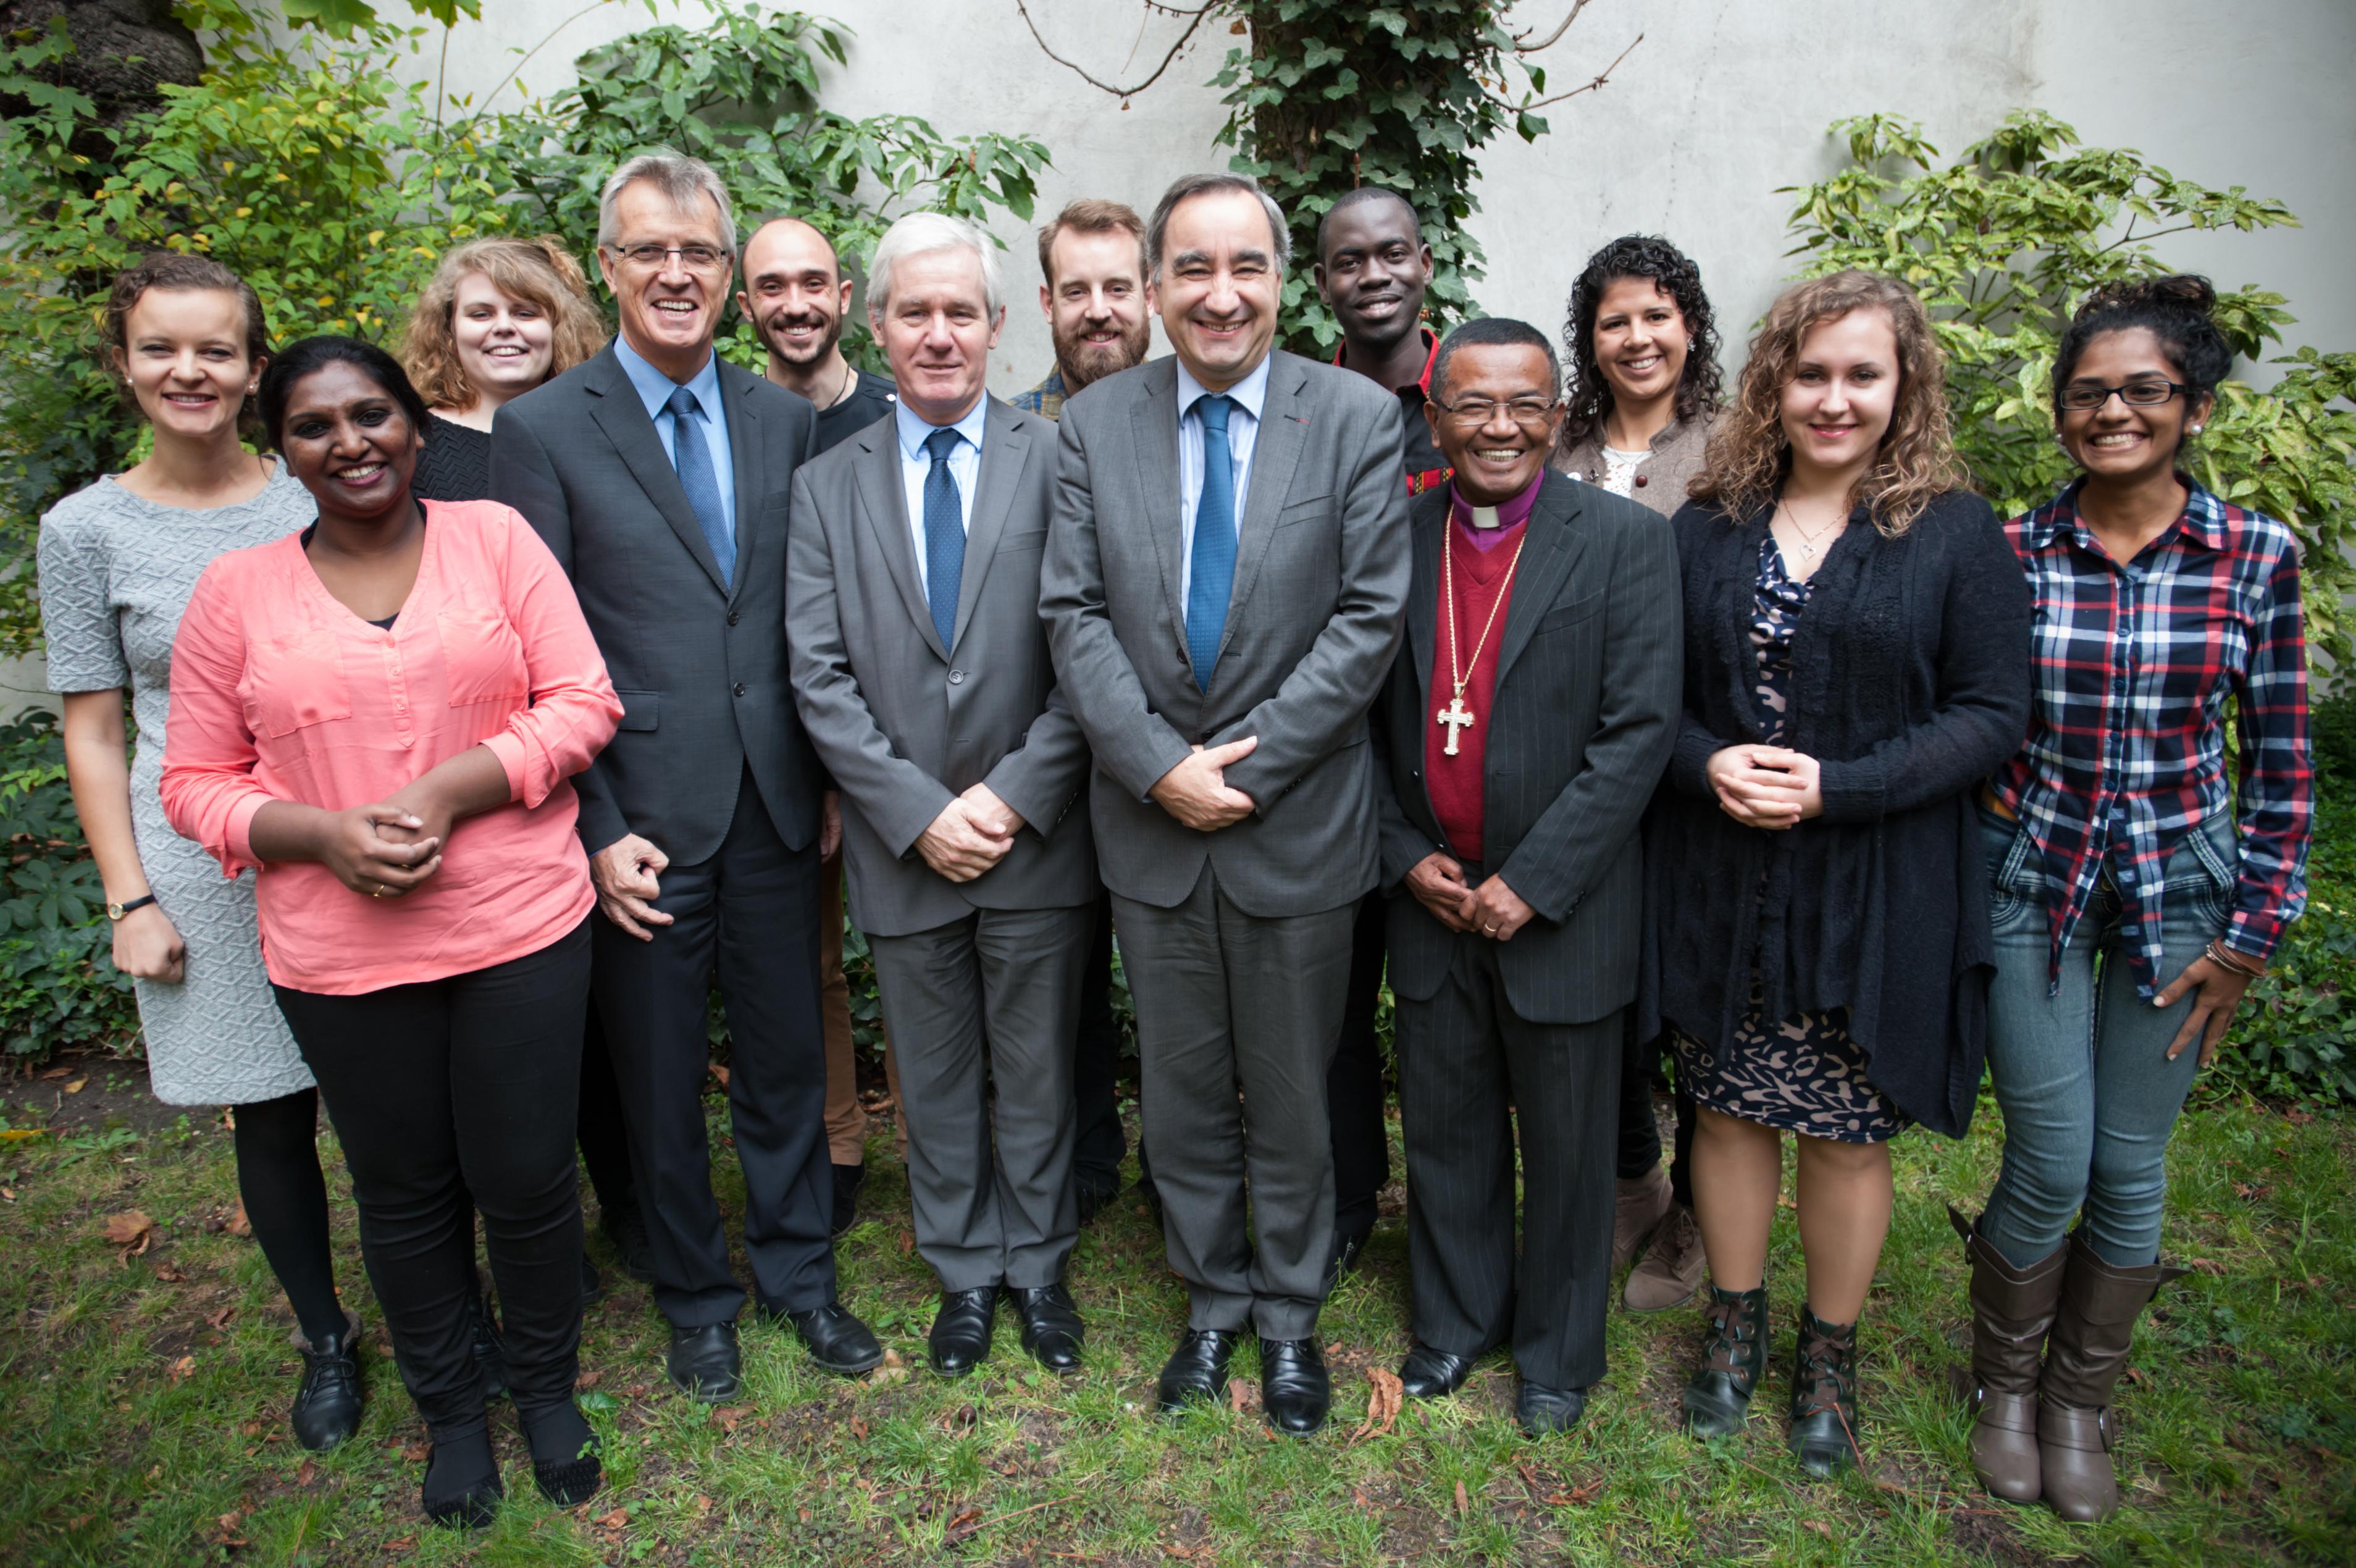 Leaders of Protestant churches in France, Rev. Laurent Schlumberger, Rev. FranÃ§ois Clavairoly and Rev. Dr Jean Ravalitera meet LWF General Secretary Rev. Dr Martin Junge (fourth from left) and the COP21 LWF delegtation, in Paris. Photo: LWF/Ryan Rodrick Beiler